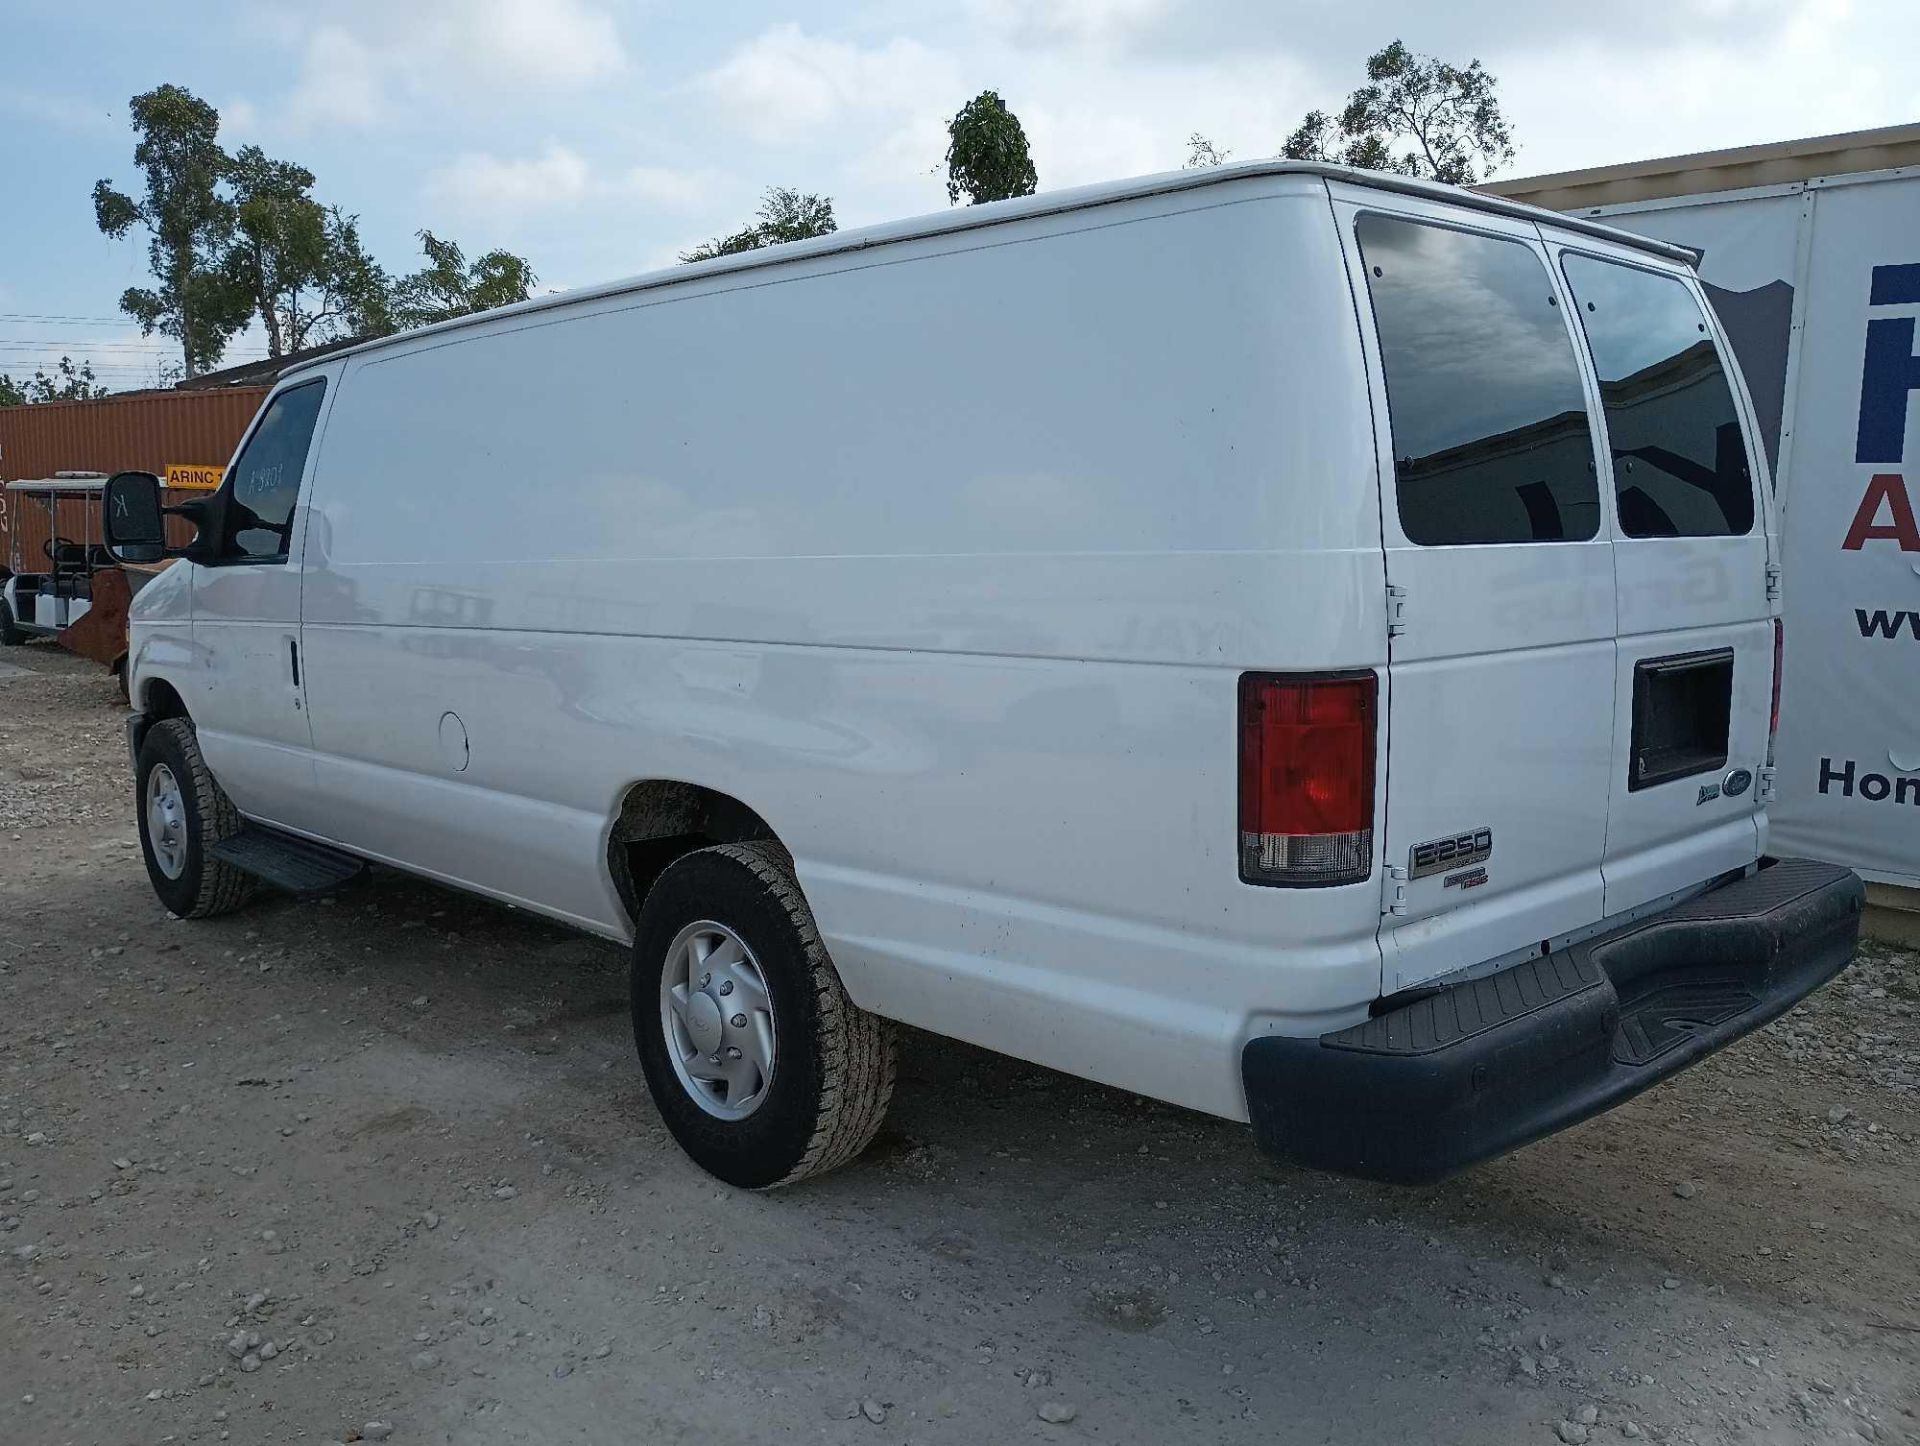 2014 Ford E350 Extended Cargo Van - Image 2 of 24